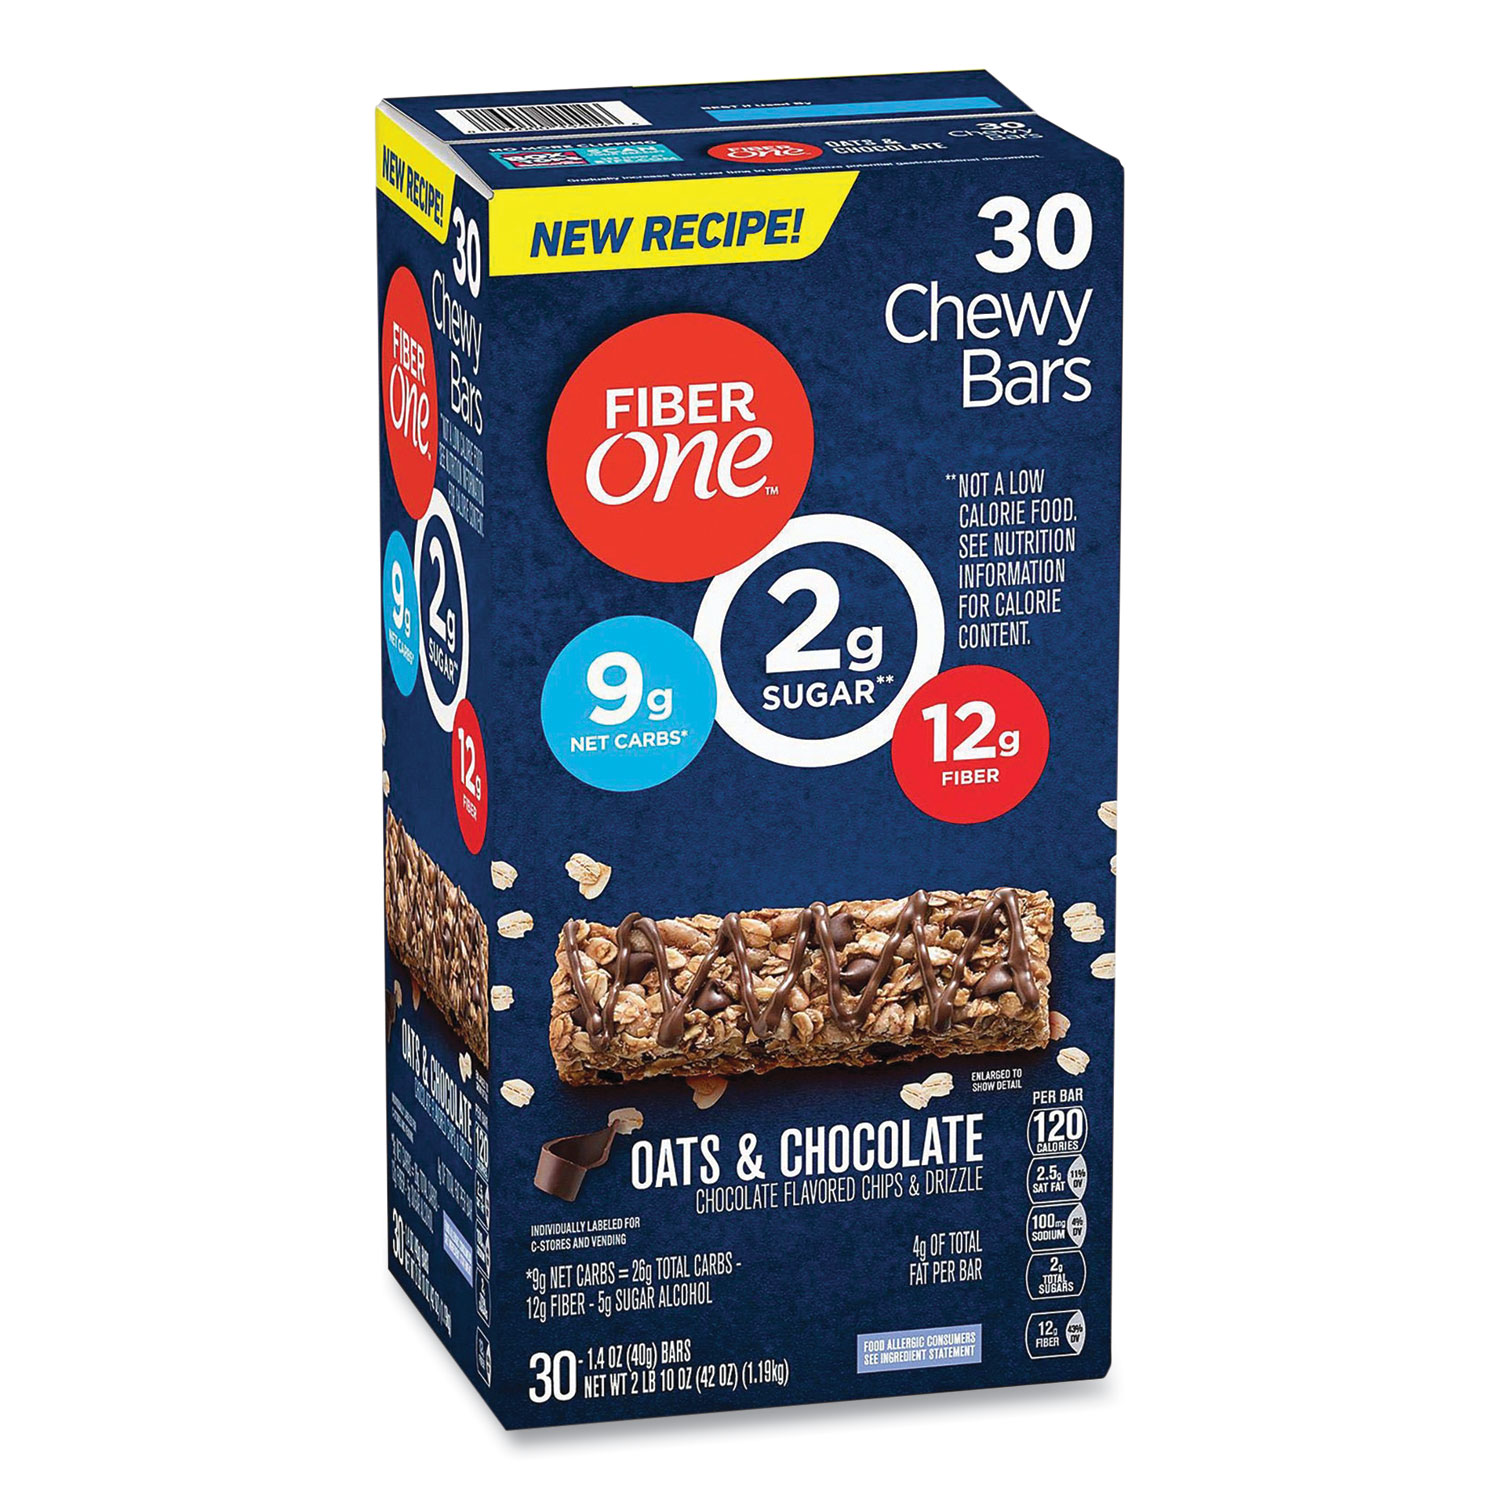  Fiber One 43616 Chewy Bars, Oats and Chocolate, 1.4 oz, 36/Box, Free Delivery in 1-4 Business Days (GRR22000539) 